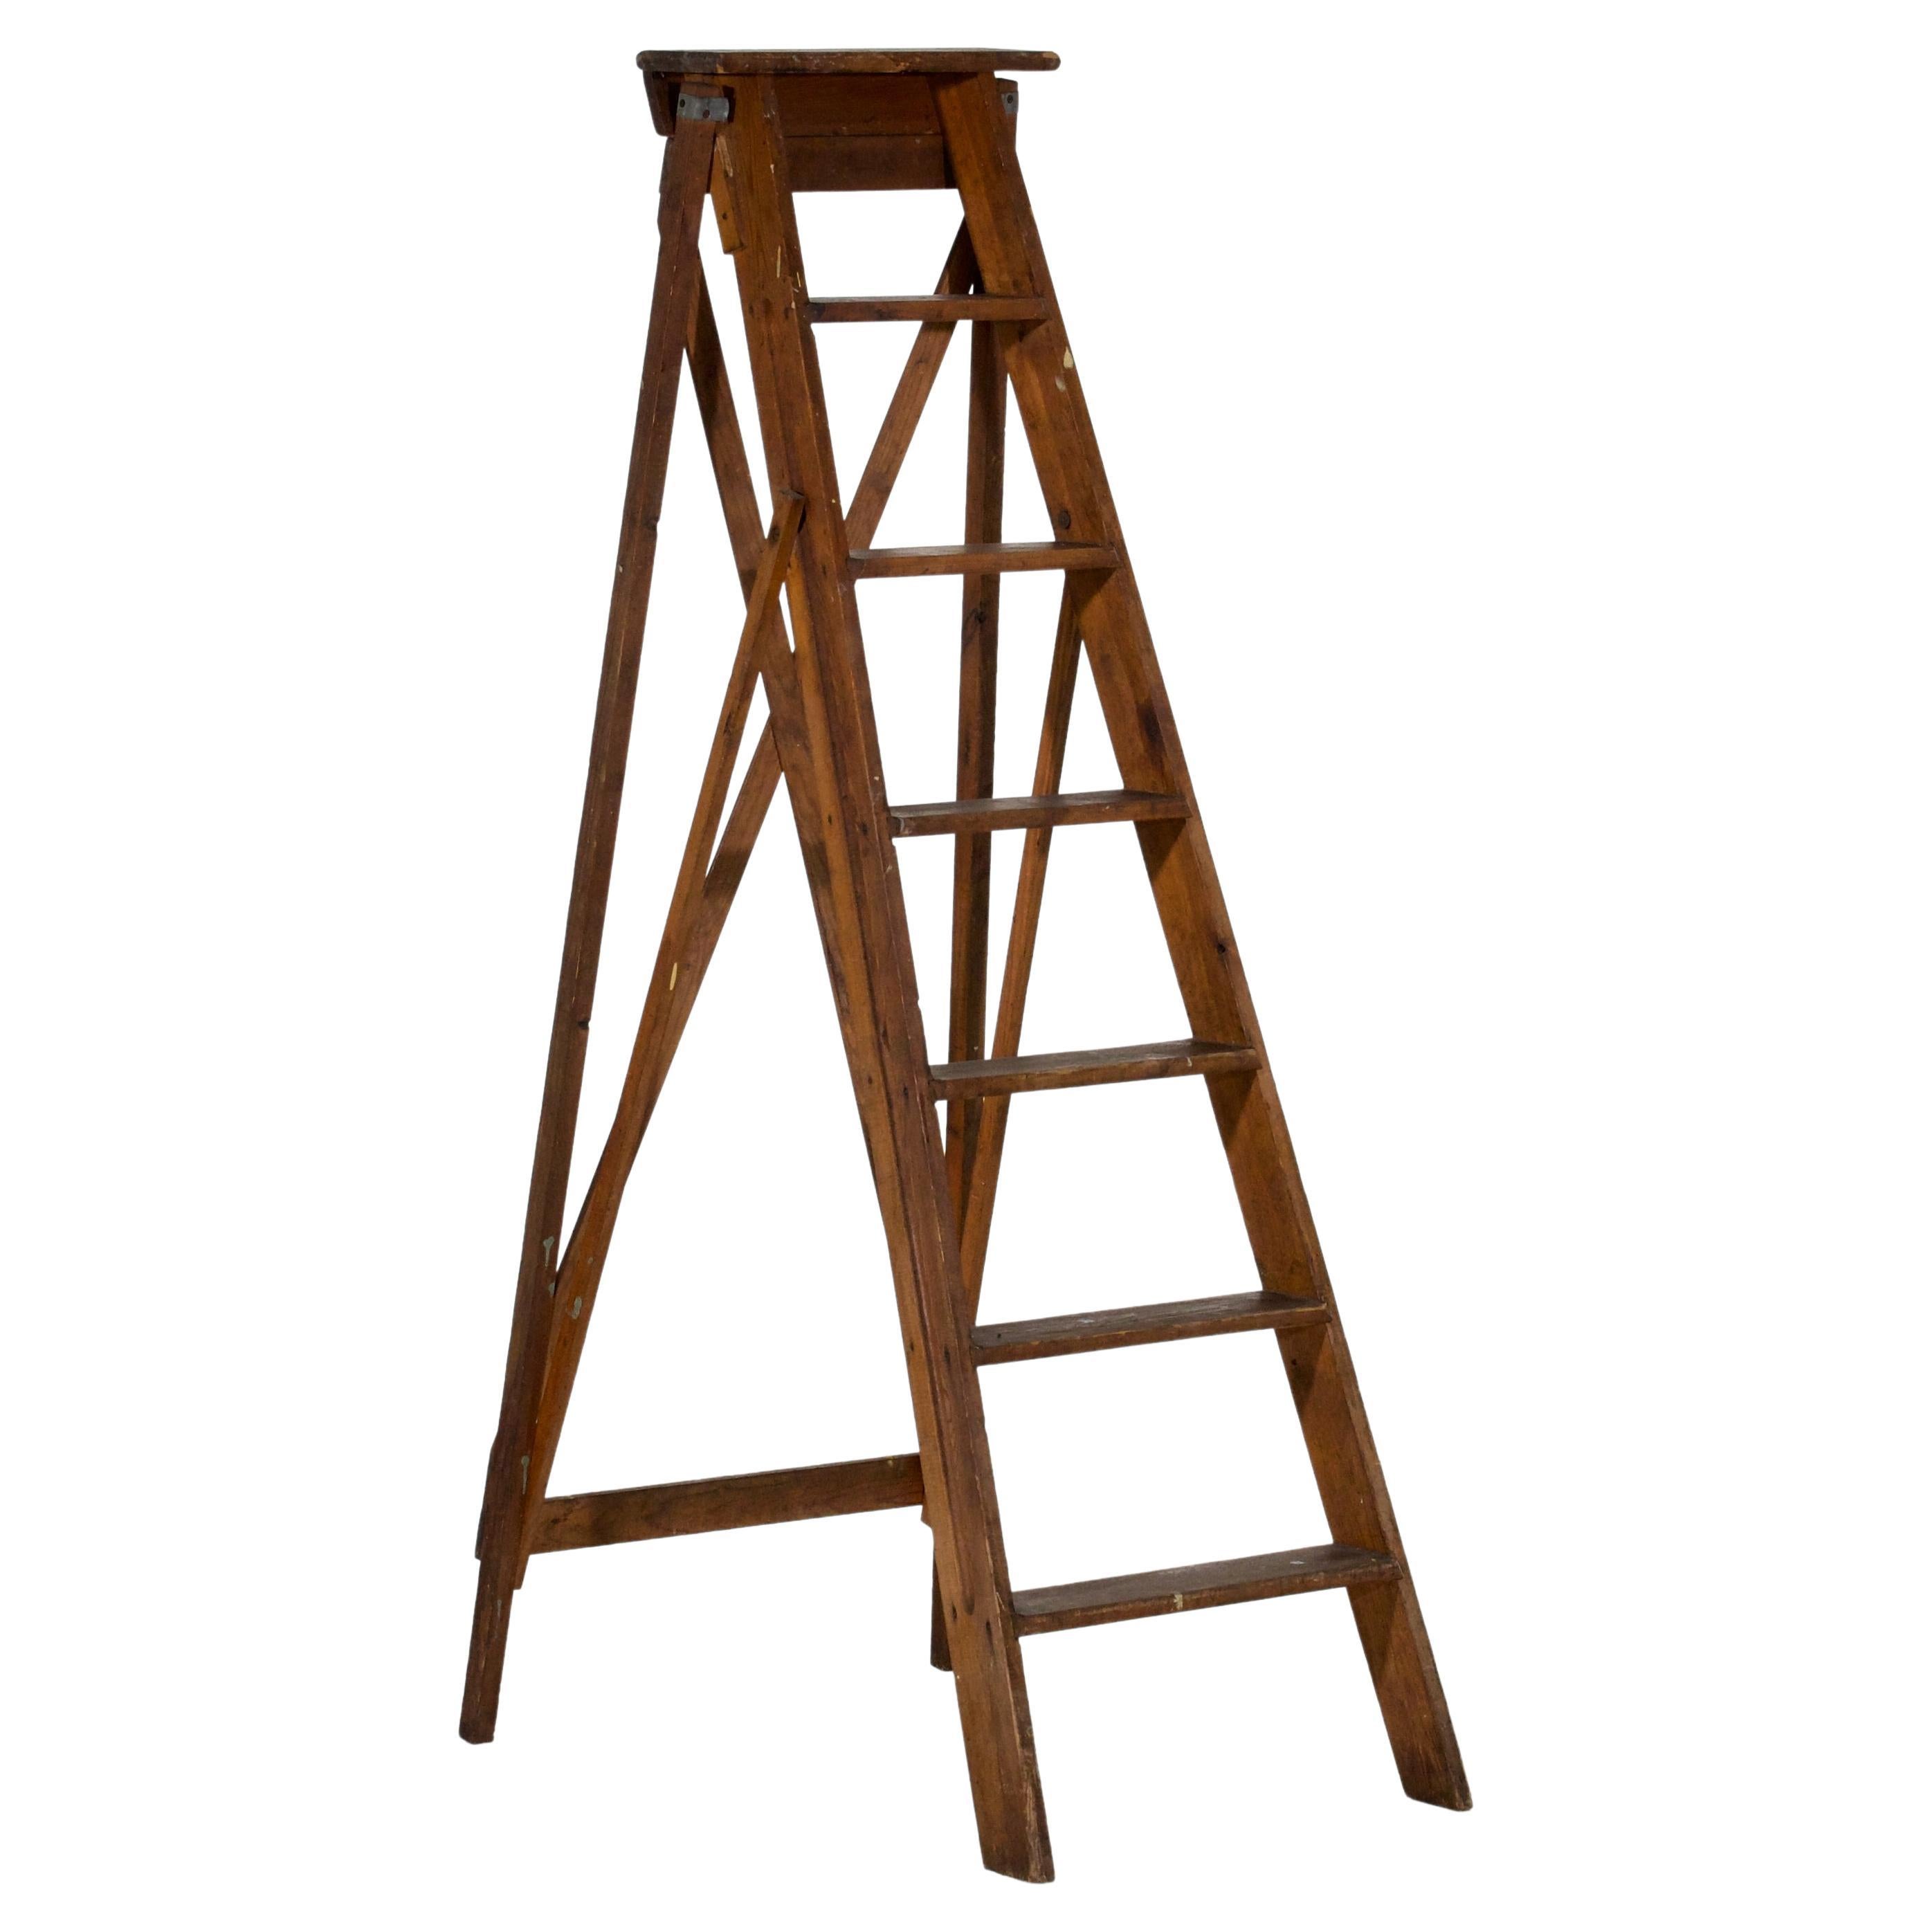 Swedish library ladder was created in the 19th C. For Sale